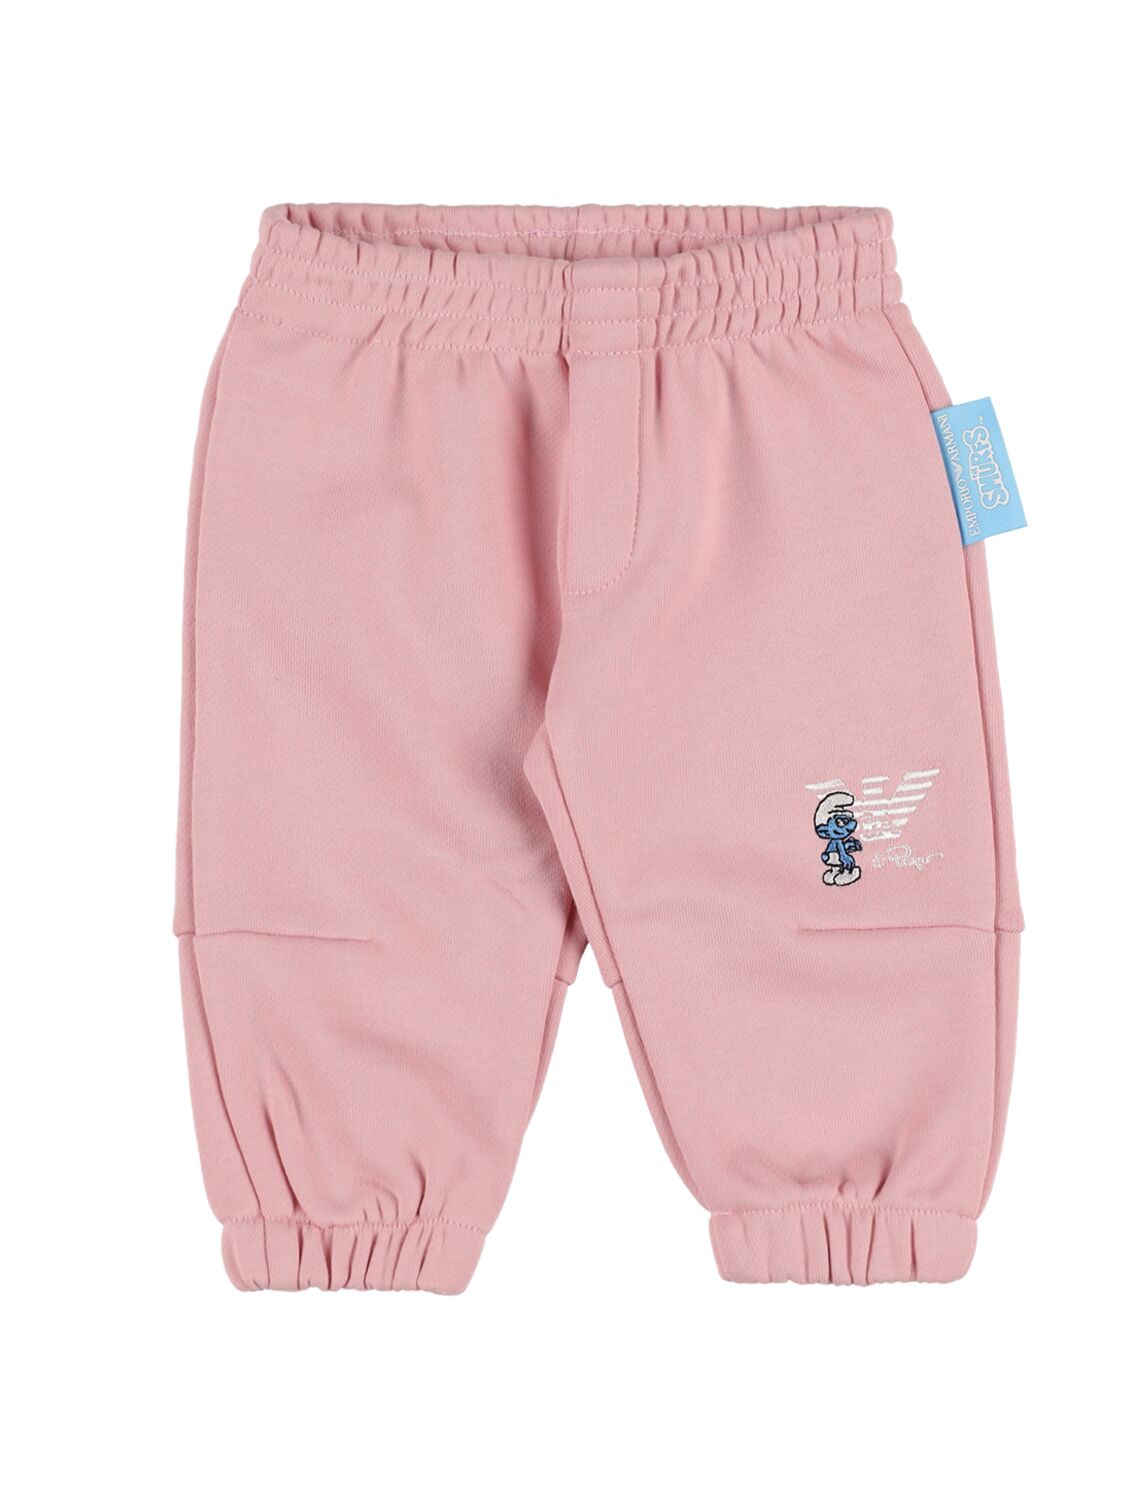 Image of Smurfs Embroidered Cotton Sweatpants